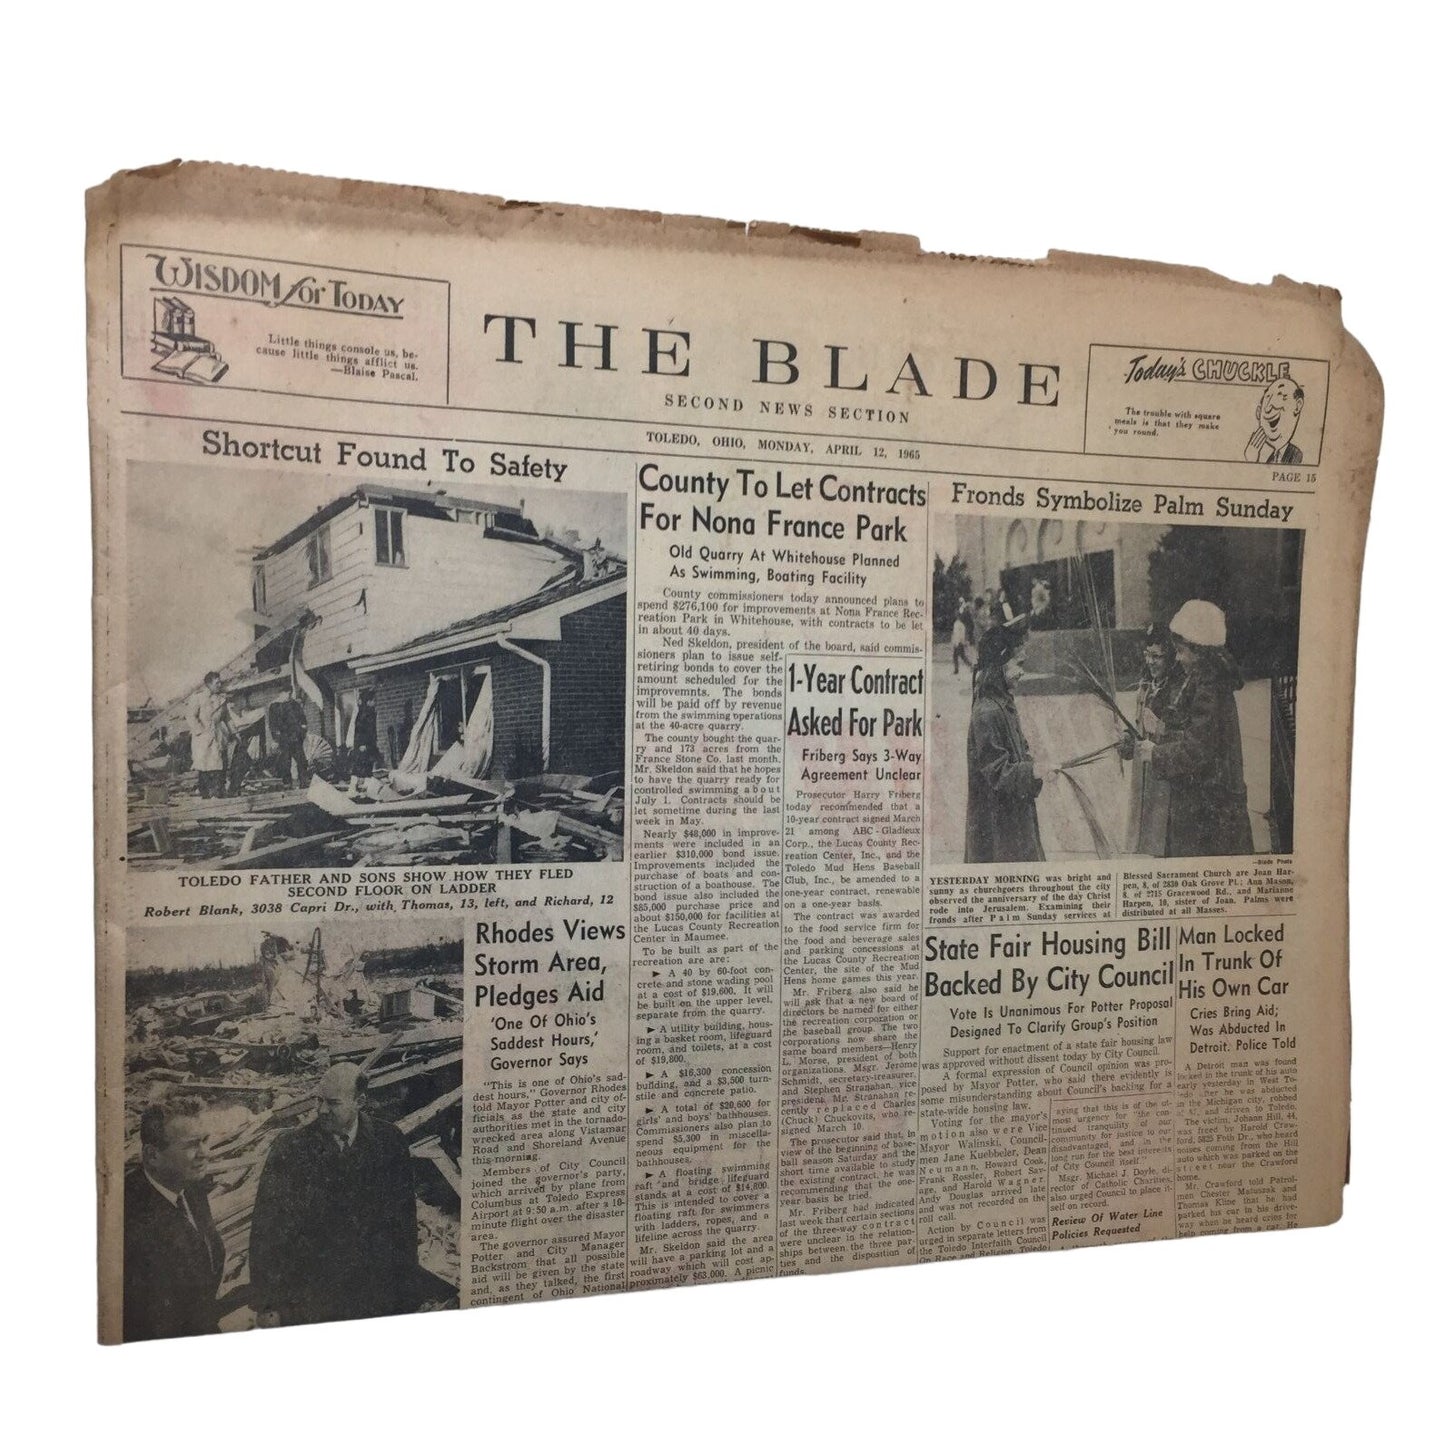 The Blade Vintage Collectible Newspaper April 12, 1965 "Tornadoes Kill 13 in City"